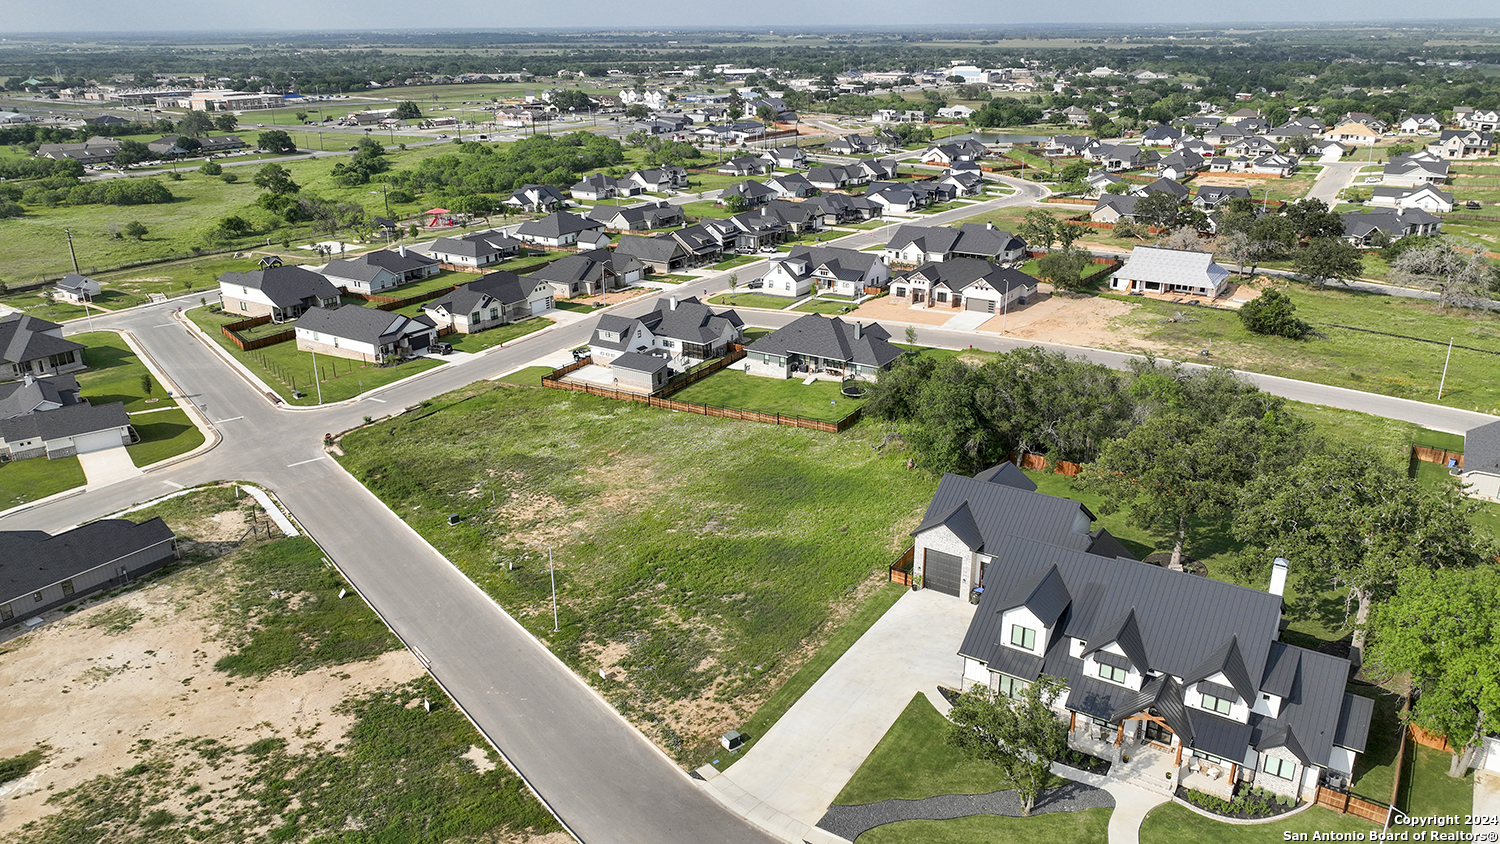 Photo of 117 Chinaberry Hl in La Vernia, TX